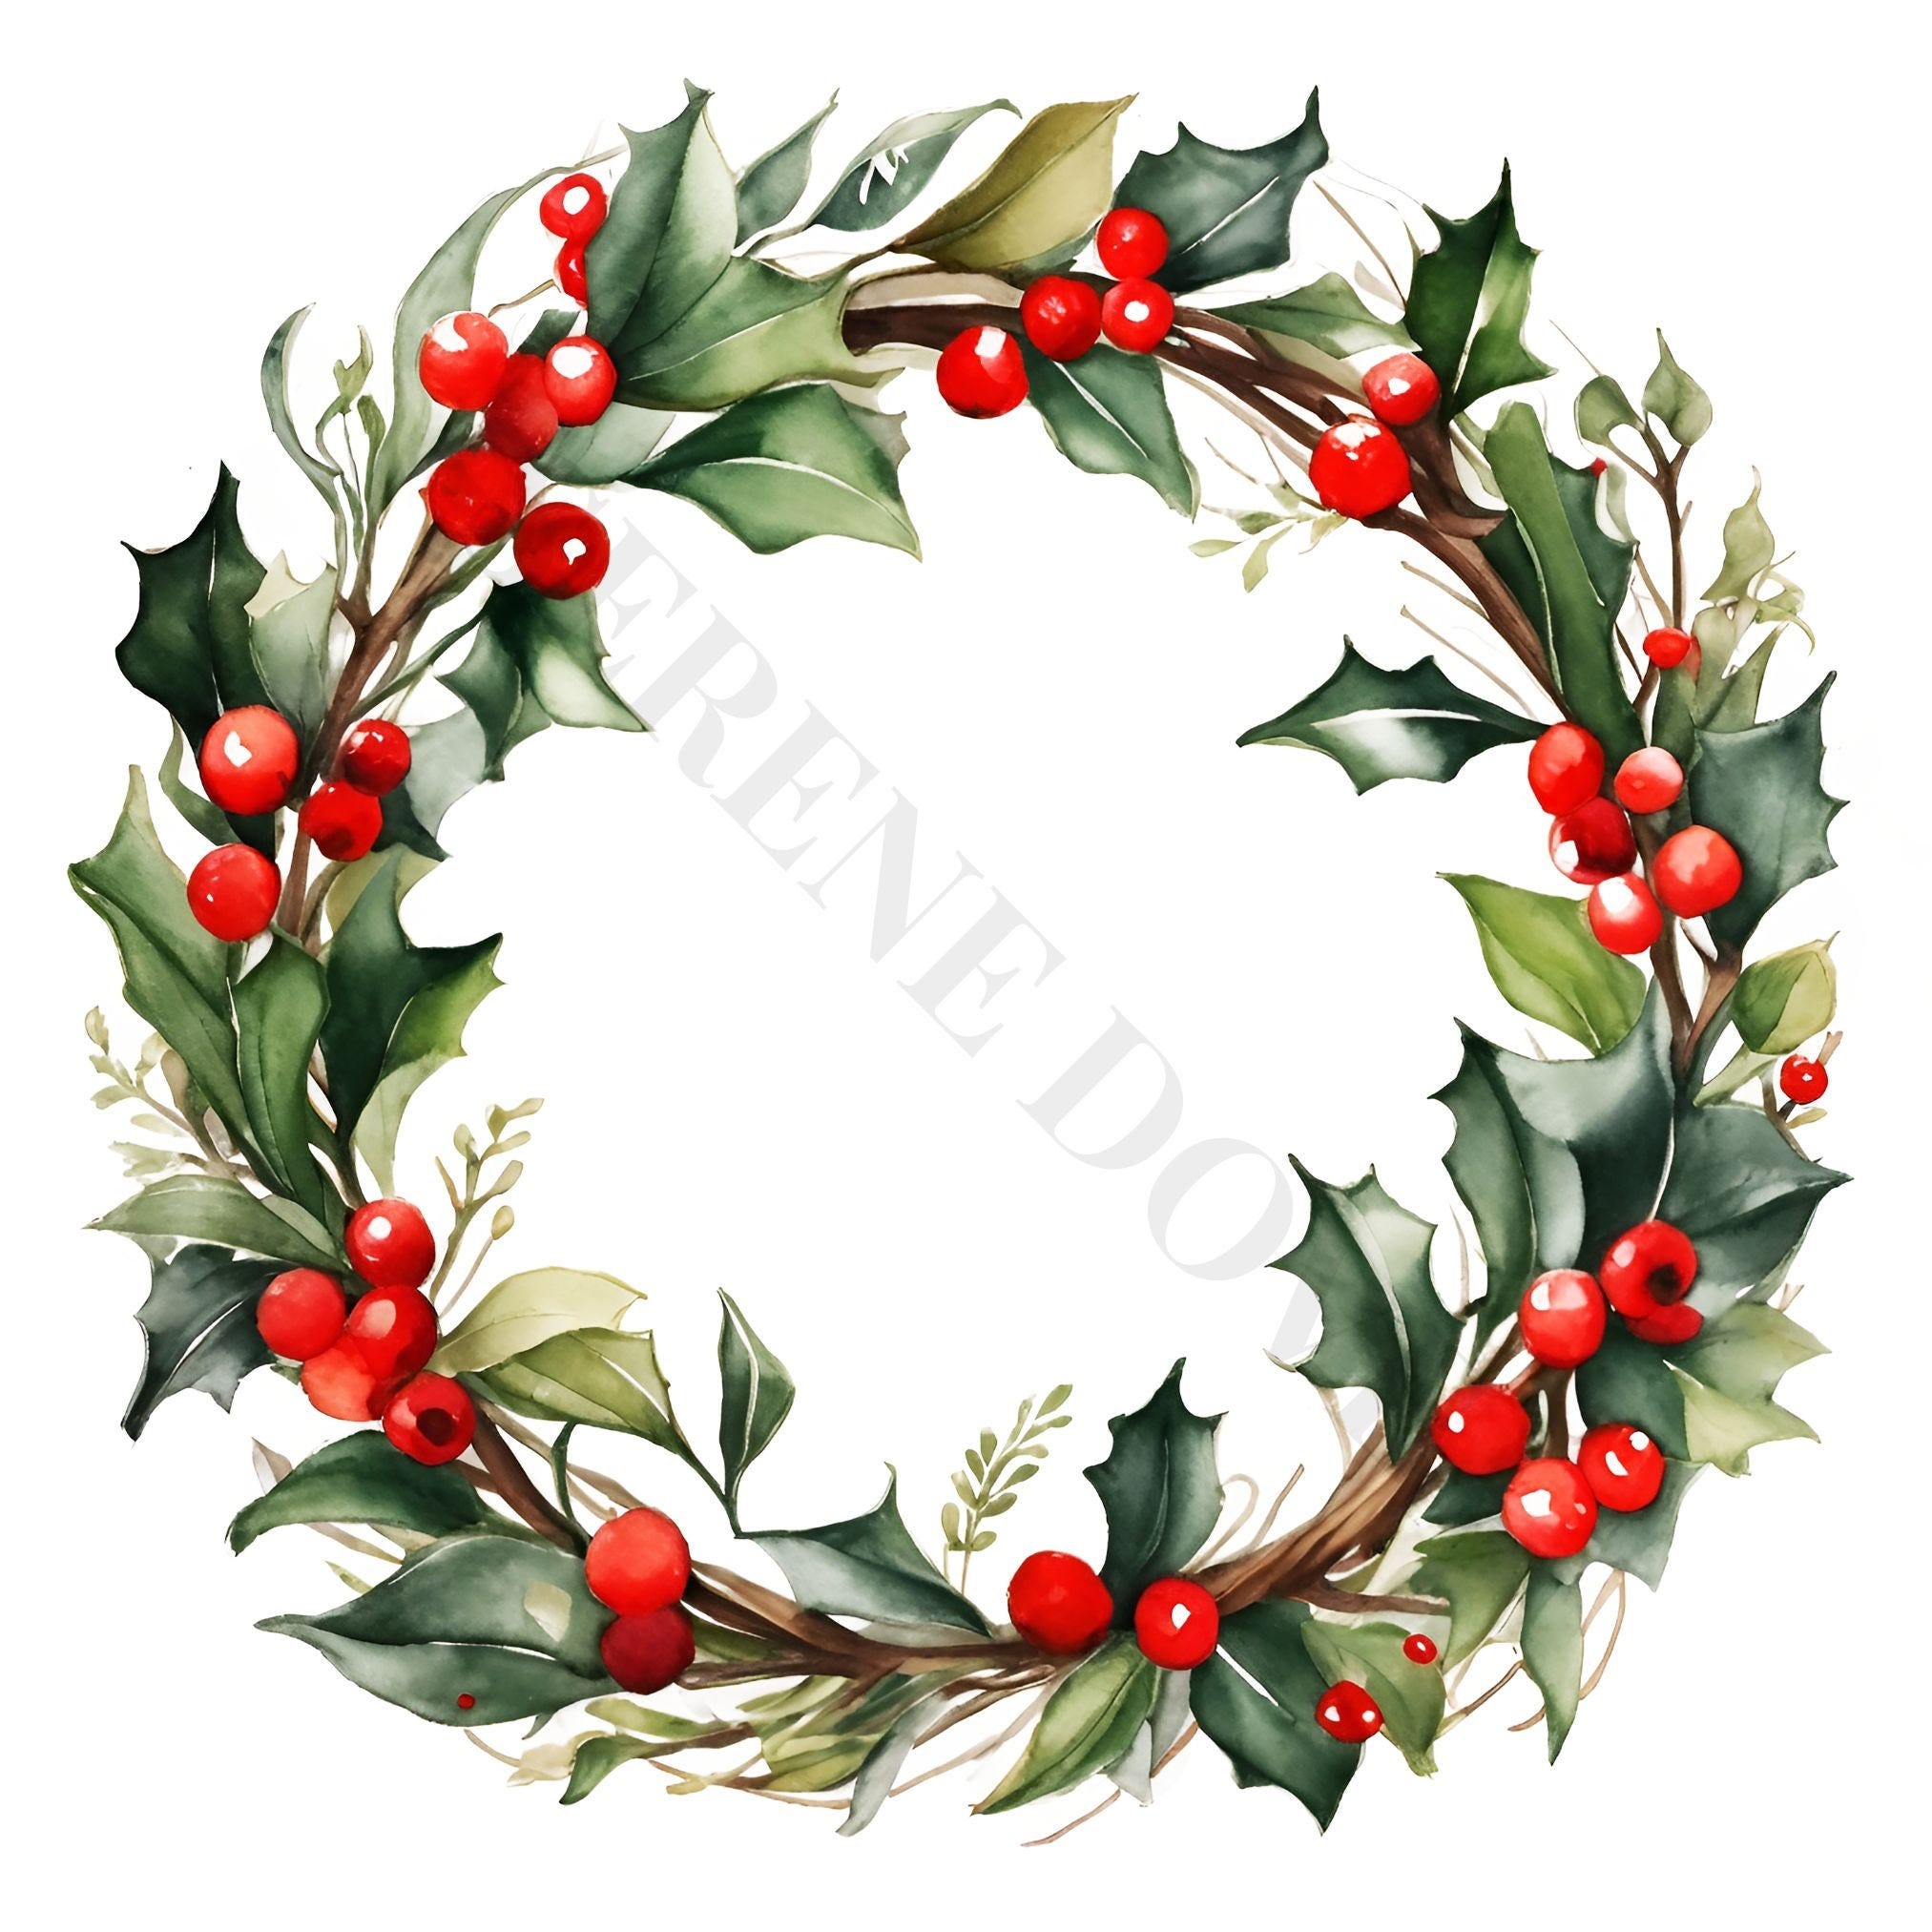 Holly Wreath Clipart - 12 High Quality PNGs, Digital Download, Card Making, Mixed Media, Digital Paper Craft